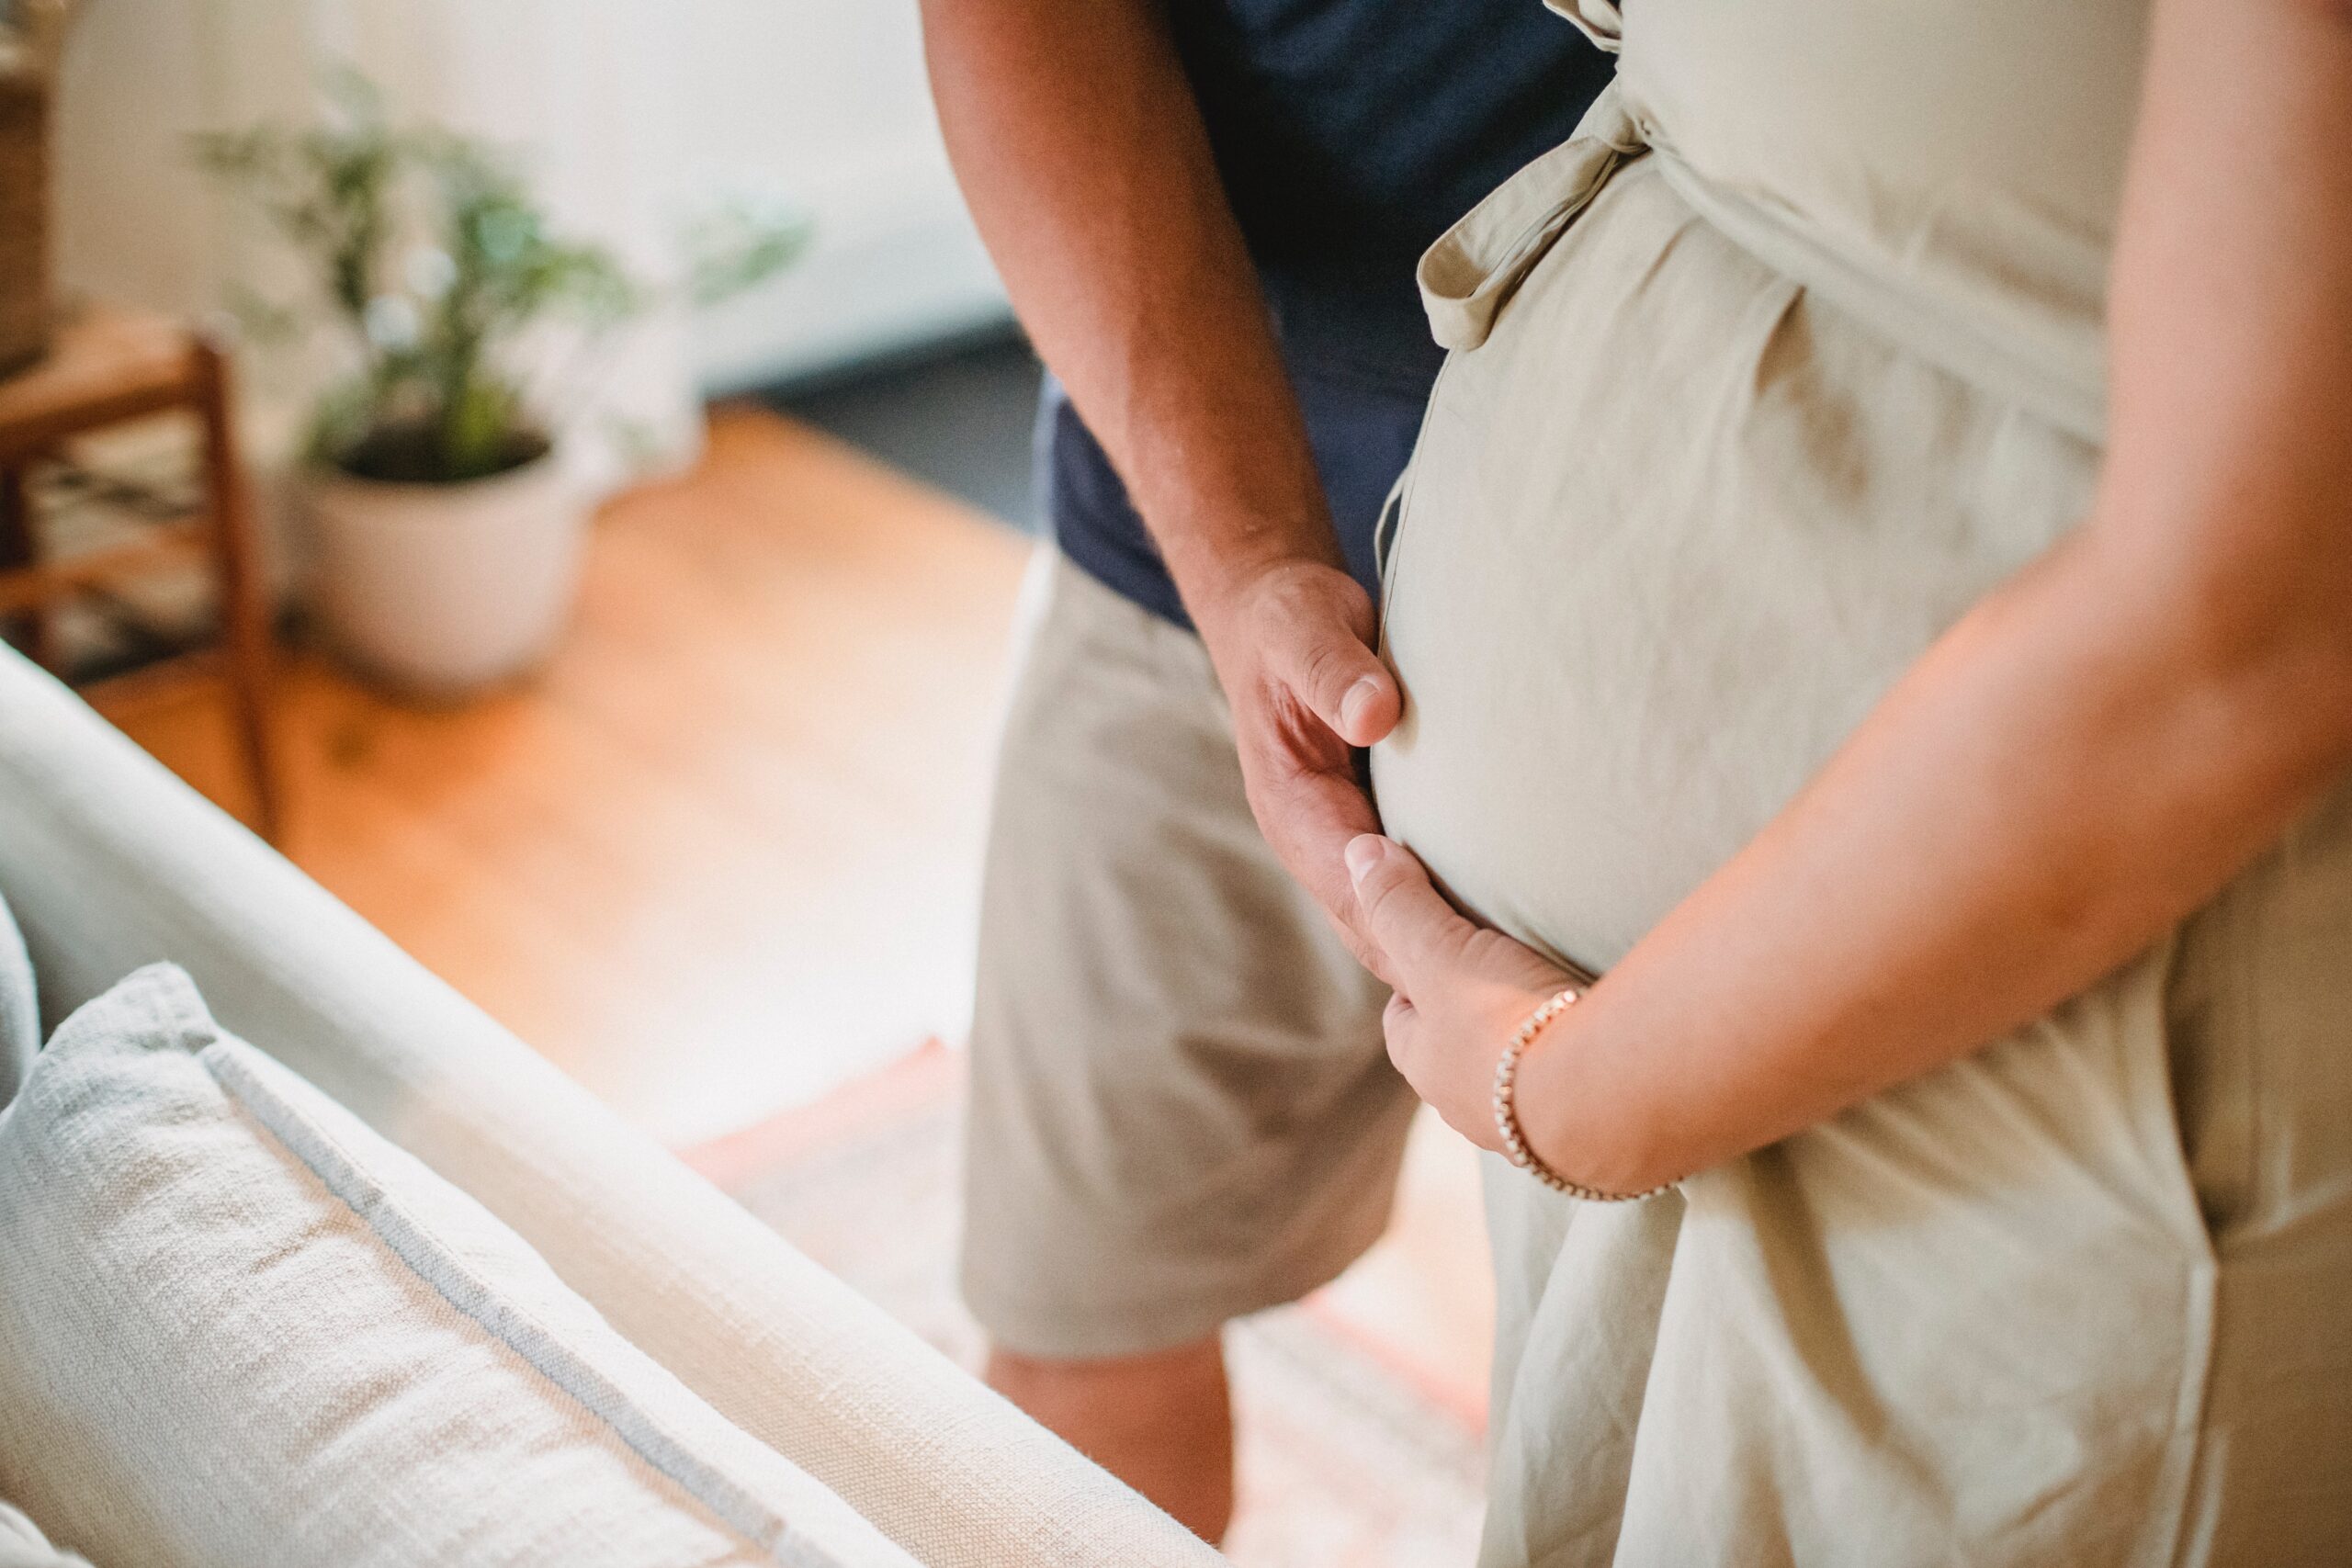 A woman expecting her child holds her stomach while her partner places one hand on her stomach, wisconsin fertility coach, wisconsin infertility treatment, understanding your menstrual cycle